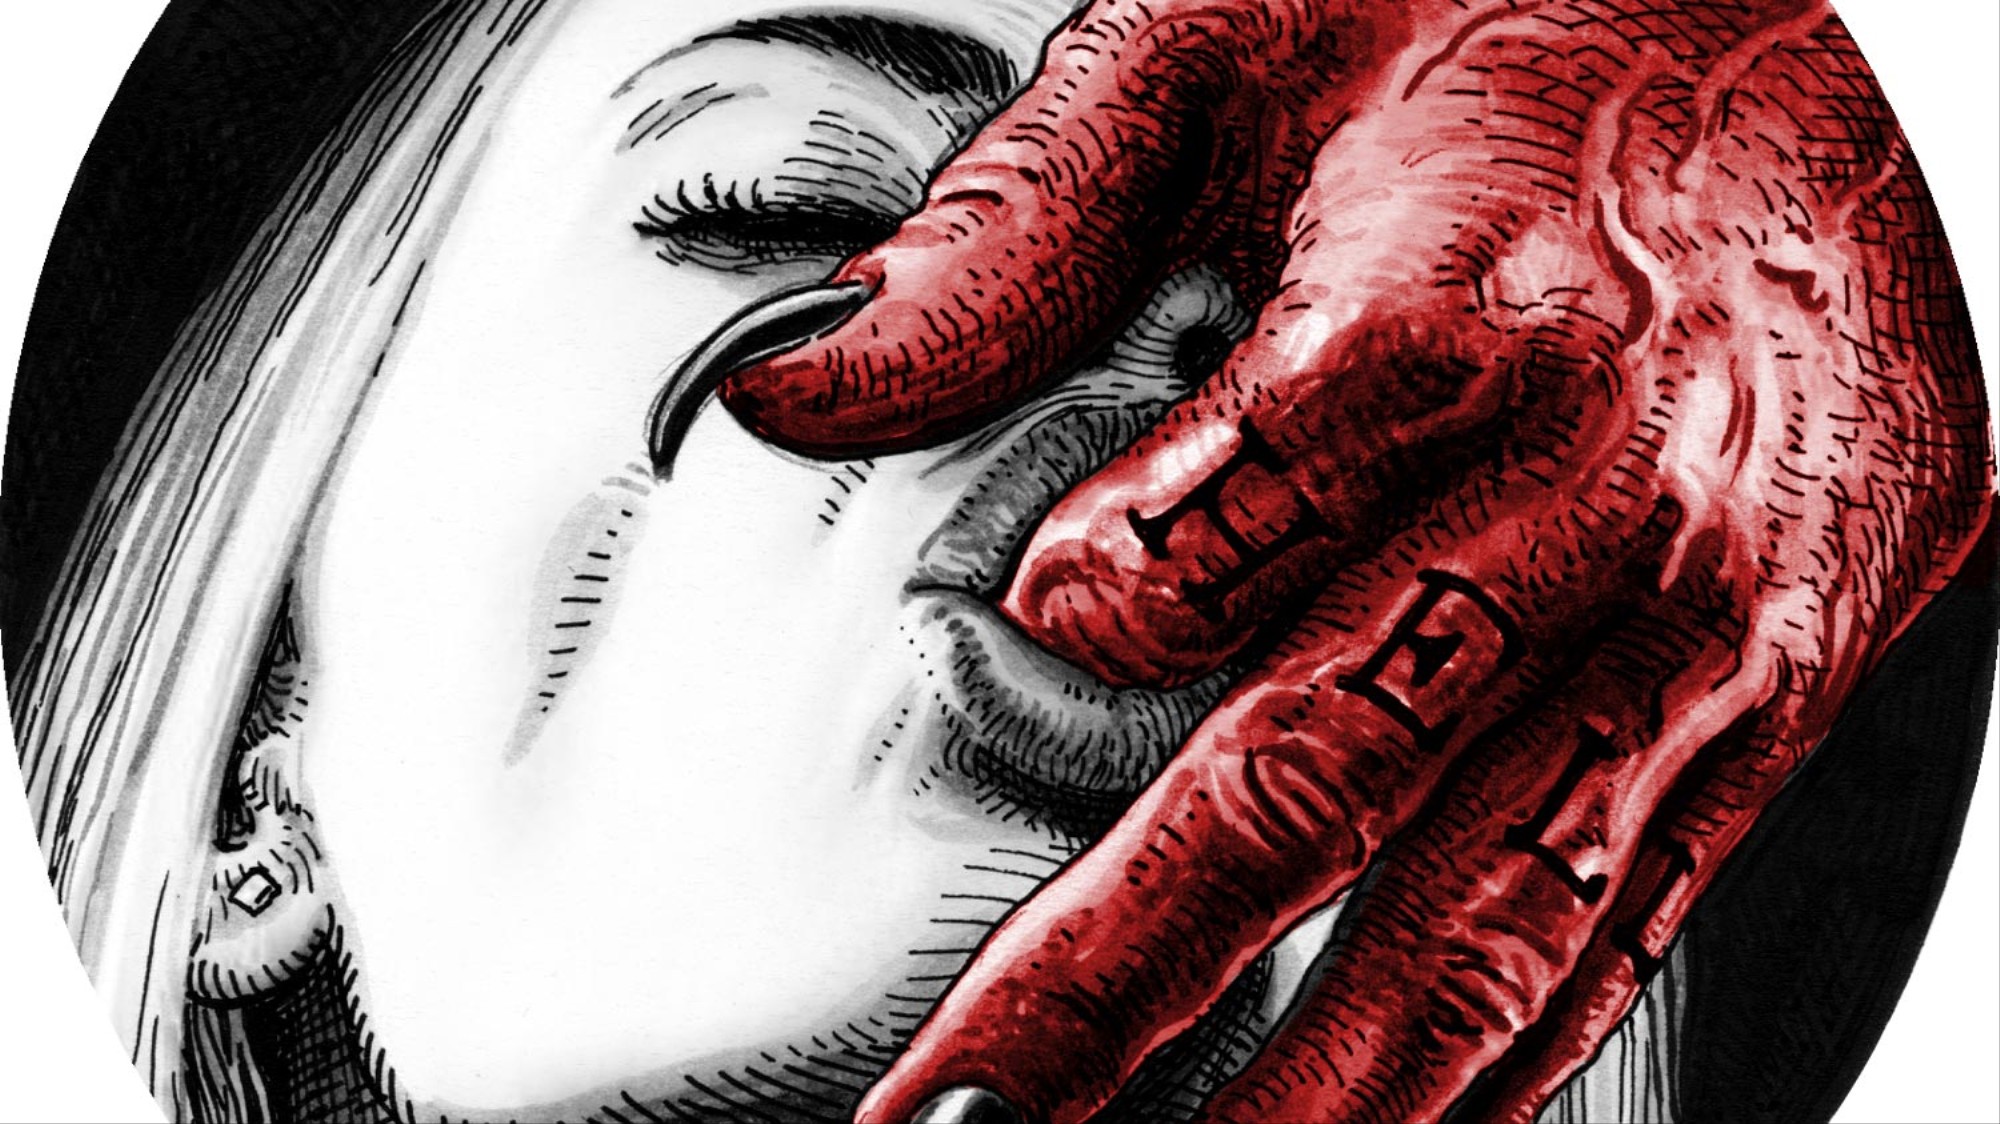 Religious Porn Drawings - NSFW] These Devilish Illustrations Are Sinfully Sexy - VICE